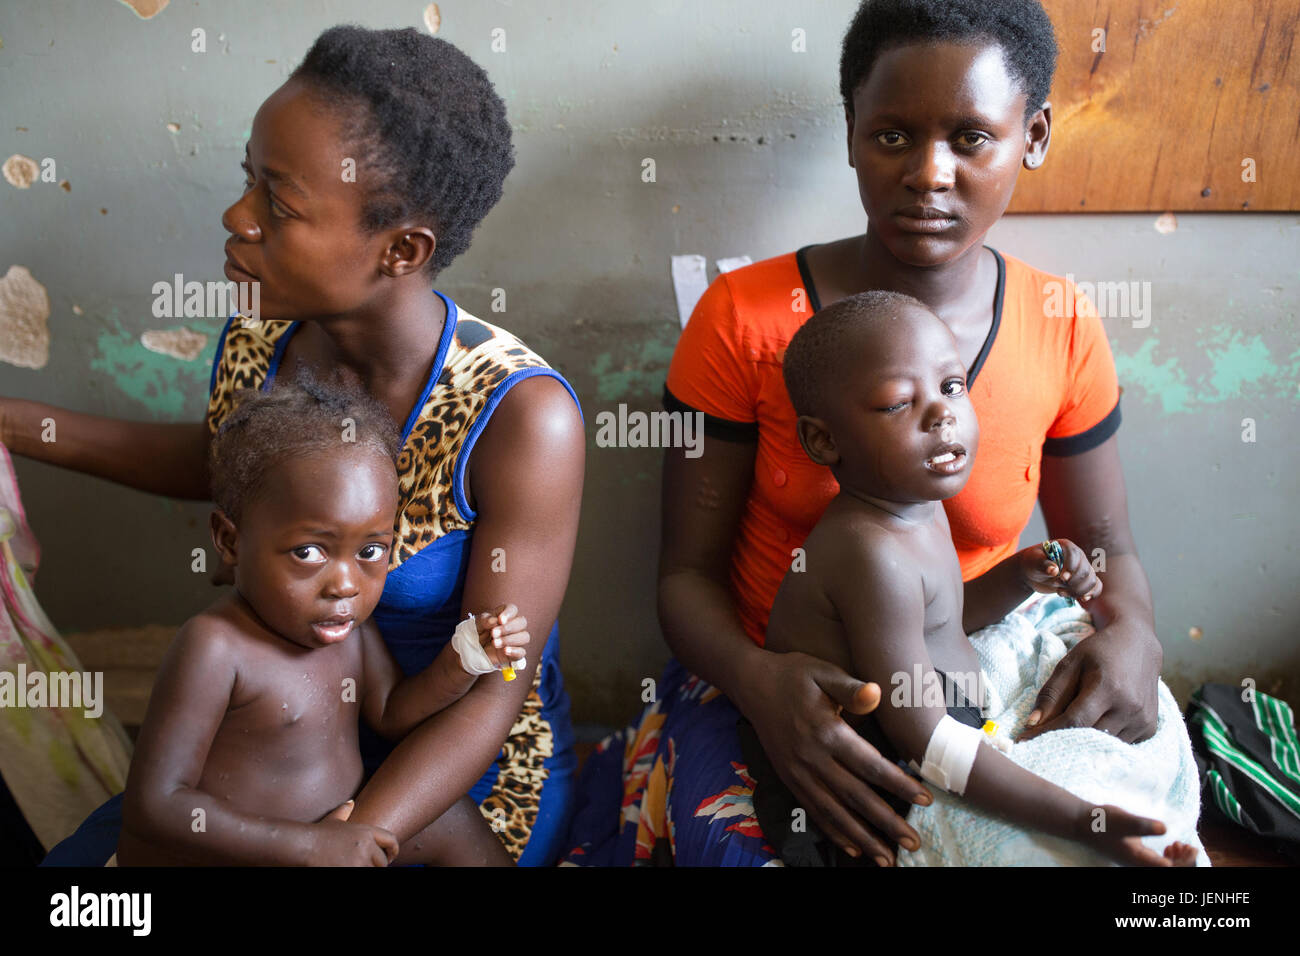 Patients wait to be seen at an underserved hospital in Bundibugyo, Uganda. Stock Photo